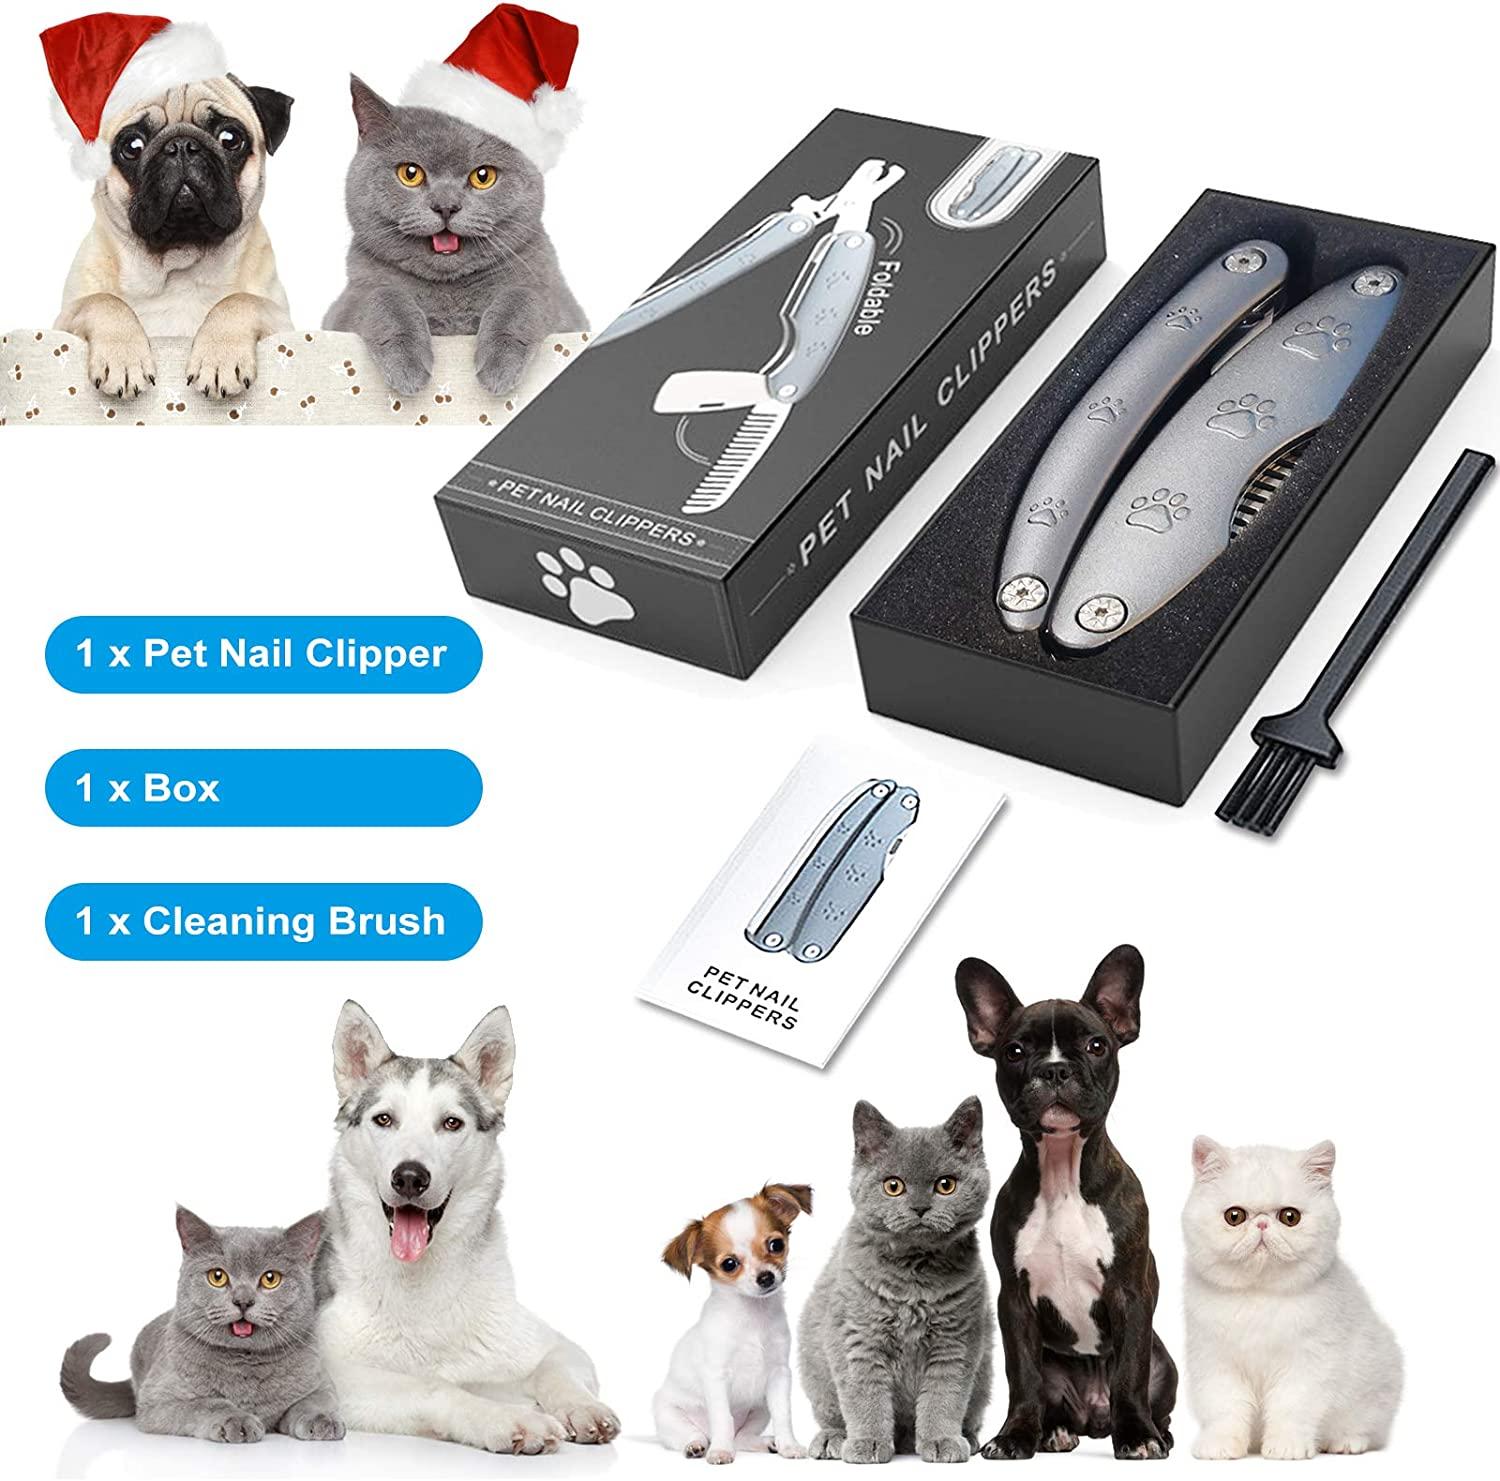 Dog Nail Trimmers Large Breed : Amazon.com: JW Pet Company GripSoft Deluxe Nail  Clipper for Dogs, Large